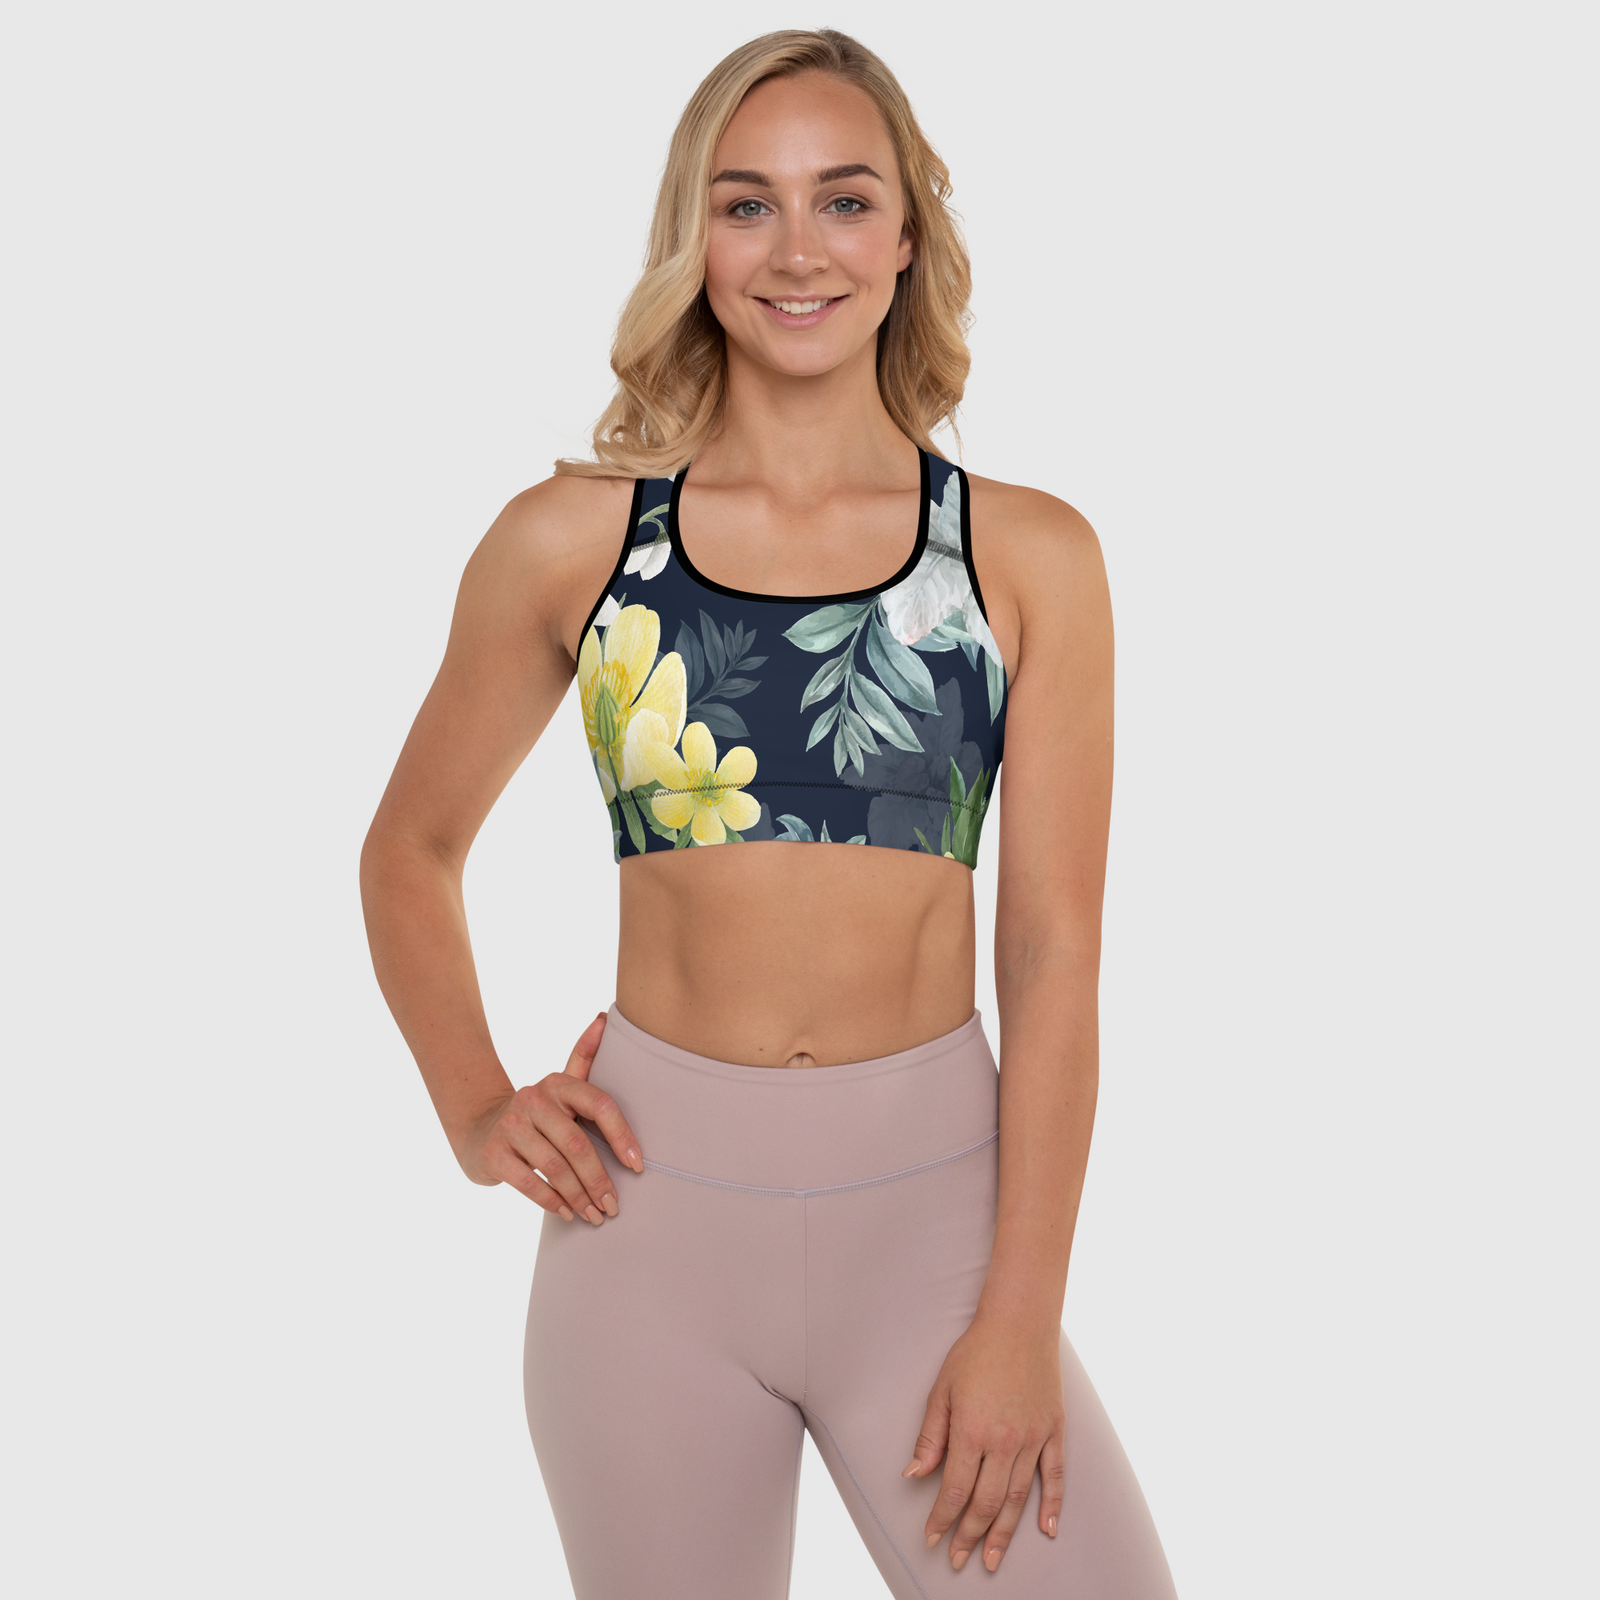 Fitness Floral Padded Sports Bra - Revive Wear Fitness Floral Padded Sports Bra at Revive Wear provides you with the ultimate support. Pair it with our workout leggings for free delivery. Shop today.